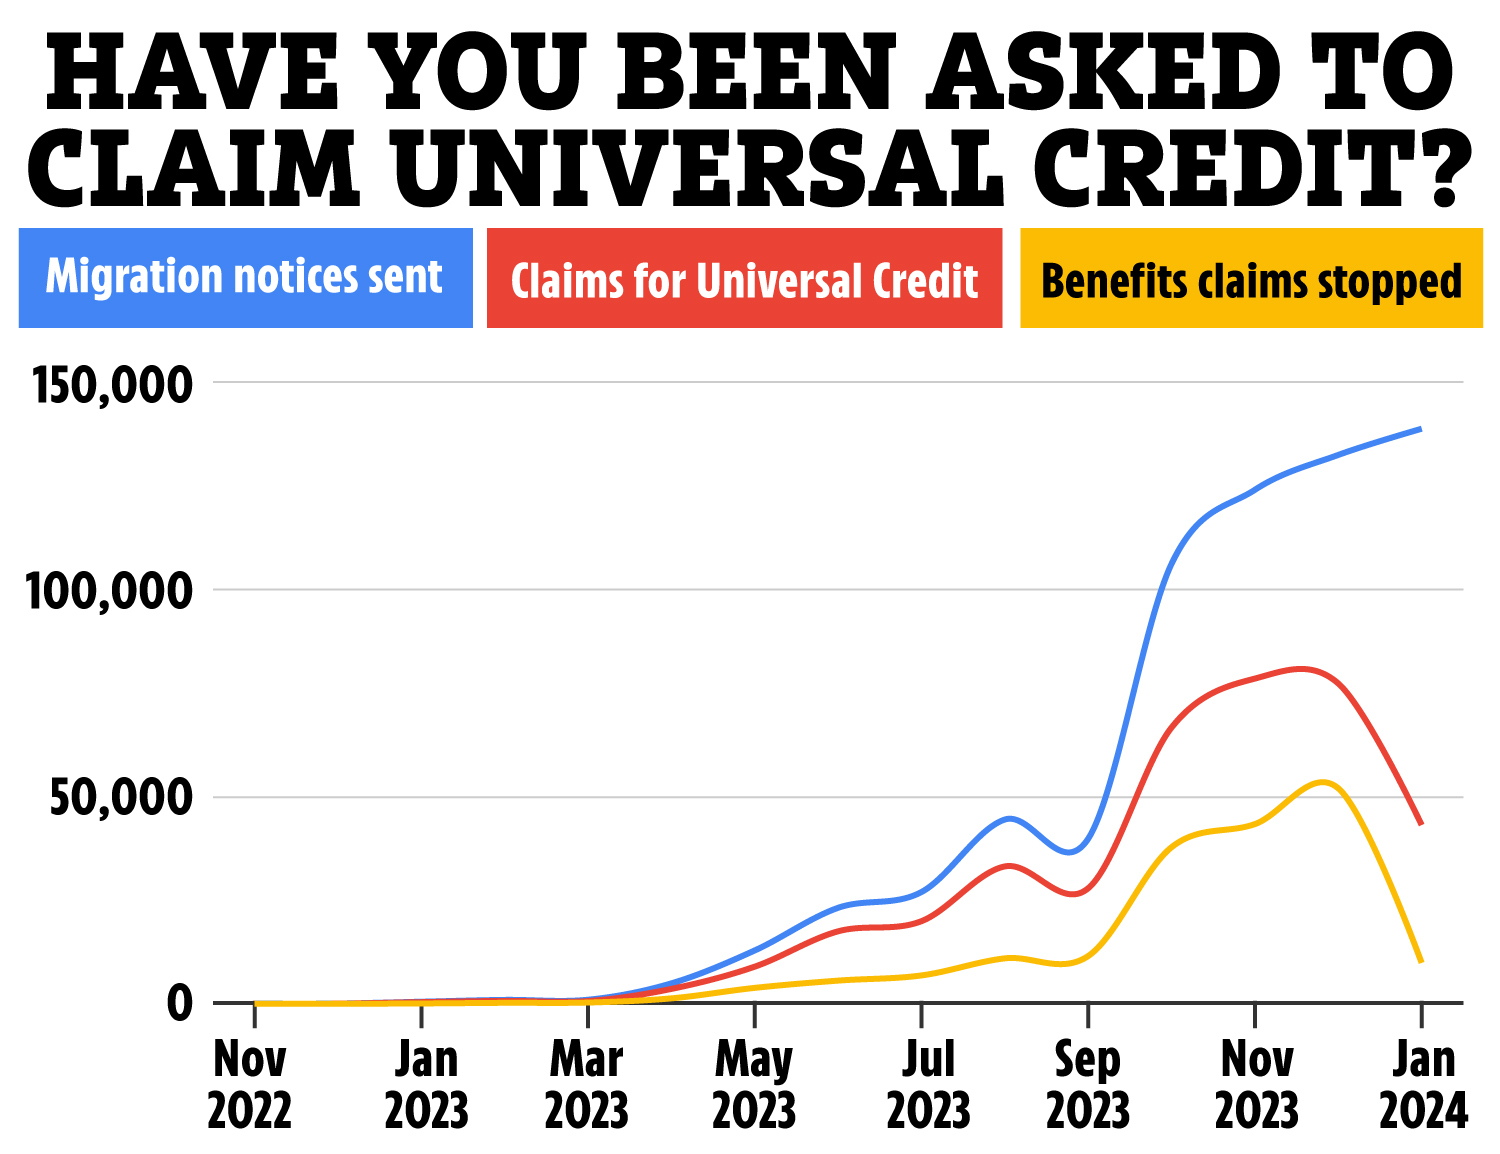 We've explained how you can get help claiming Universal Credit below